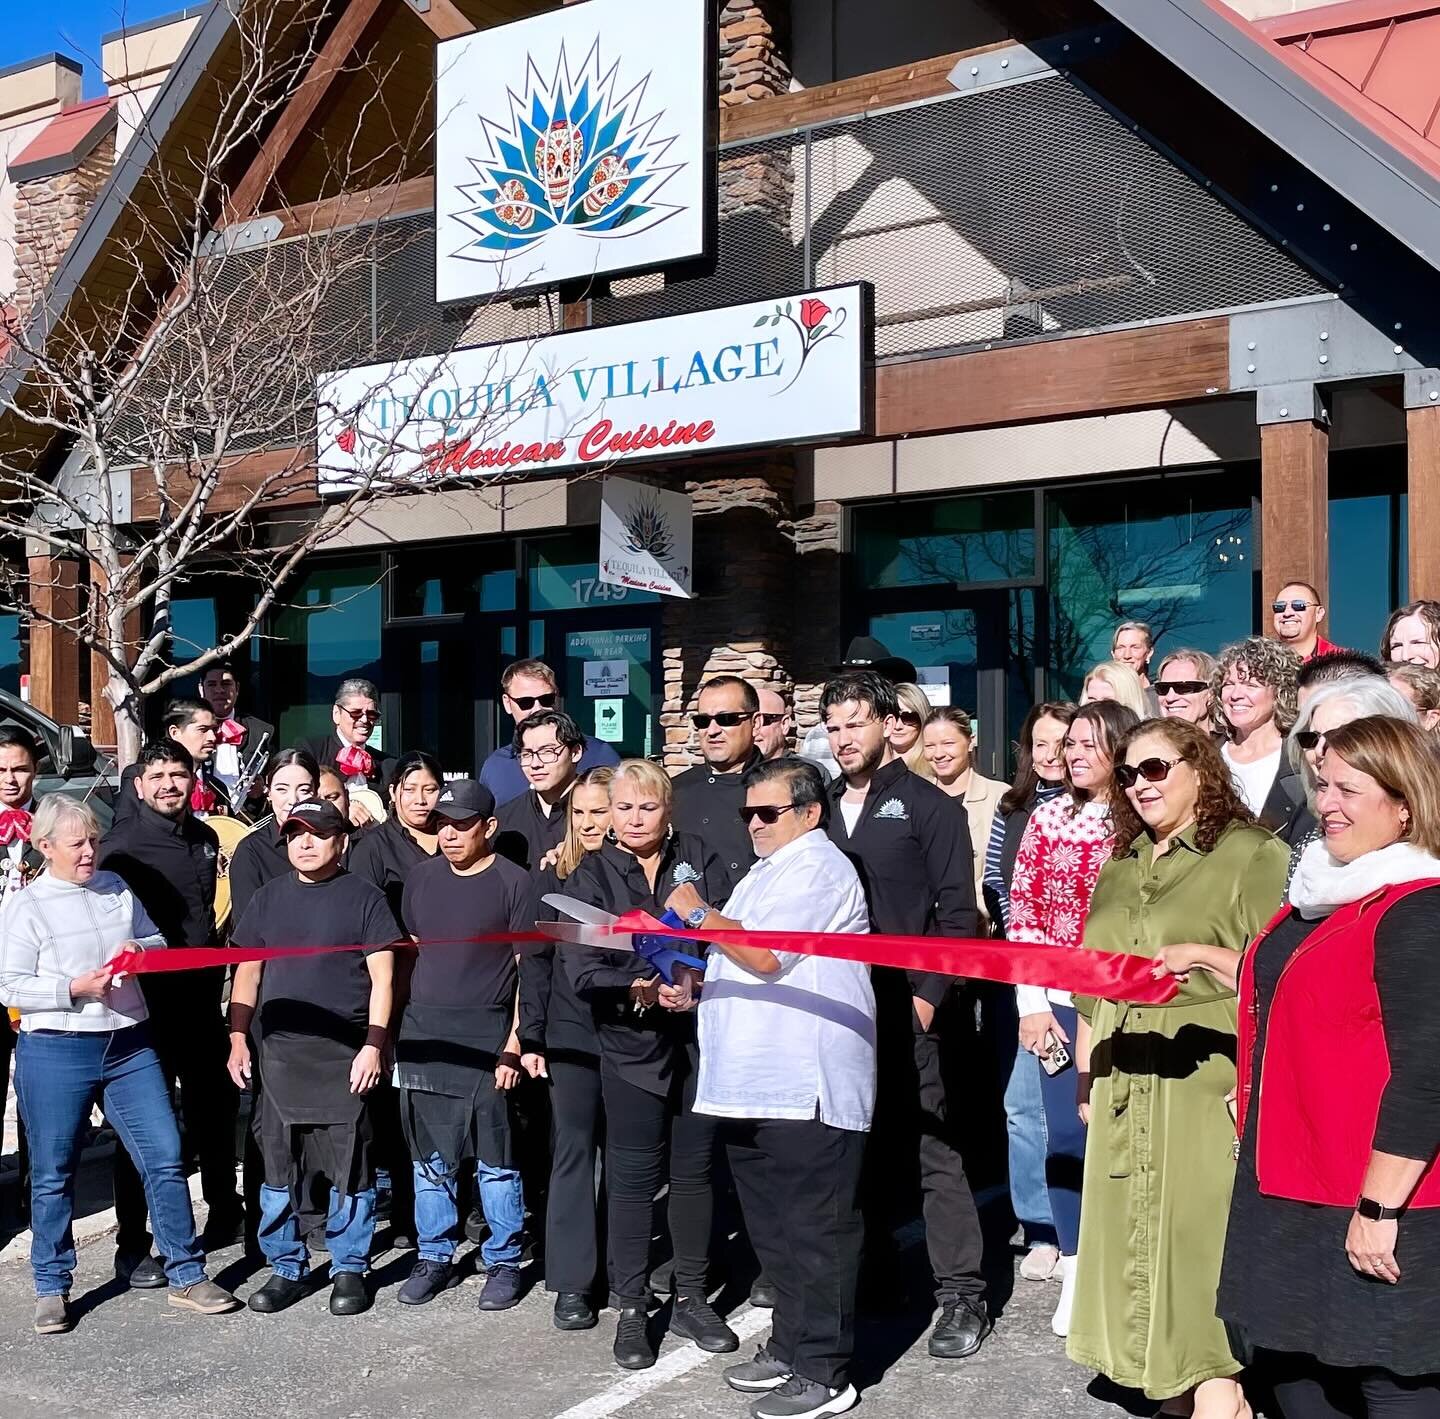 We celebrated the ribbon-cutting this week for our newest remodel at @tequila_village complete with a mariachi band. It was so fulfilling to see so many community members enjoying lunch after. We sincerely have the best clients!

If you&rsquo;re look